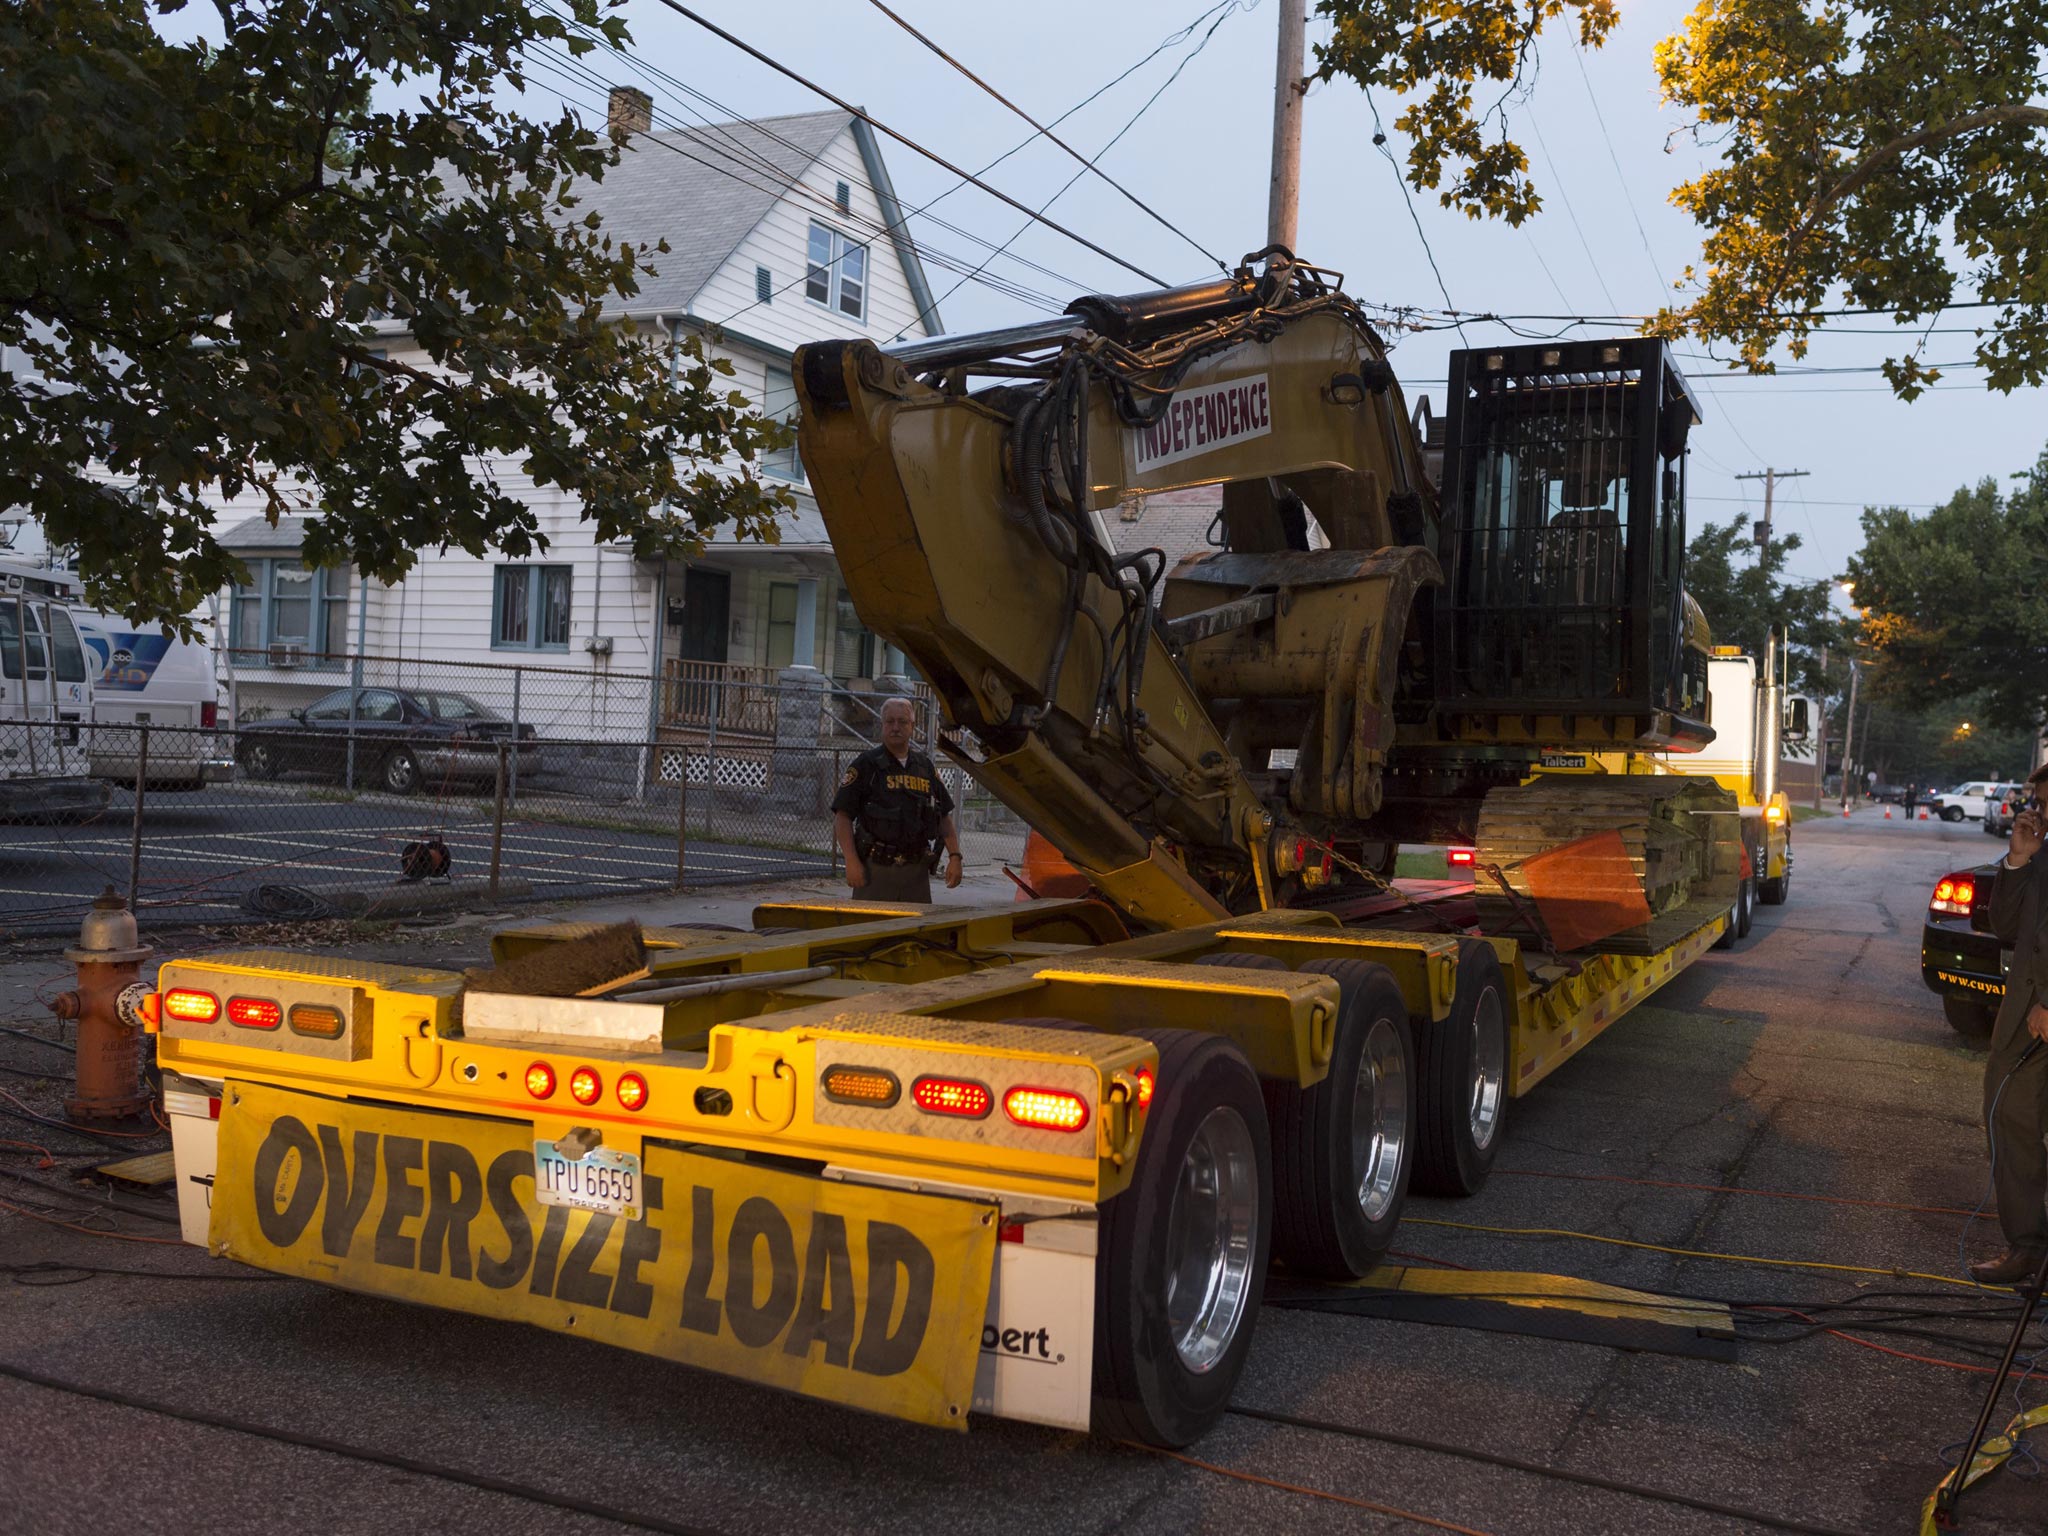 Demolition crews arrive at the home of Ariel Castro in Cleveland, Ohio. Castro was found guilty of abducting three young woman between 2002 and 2004 and today The State of Ohio will tear down his home